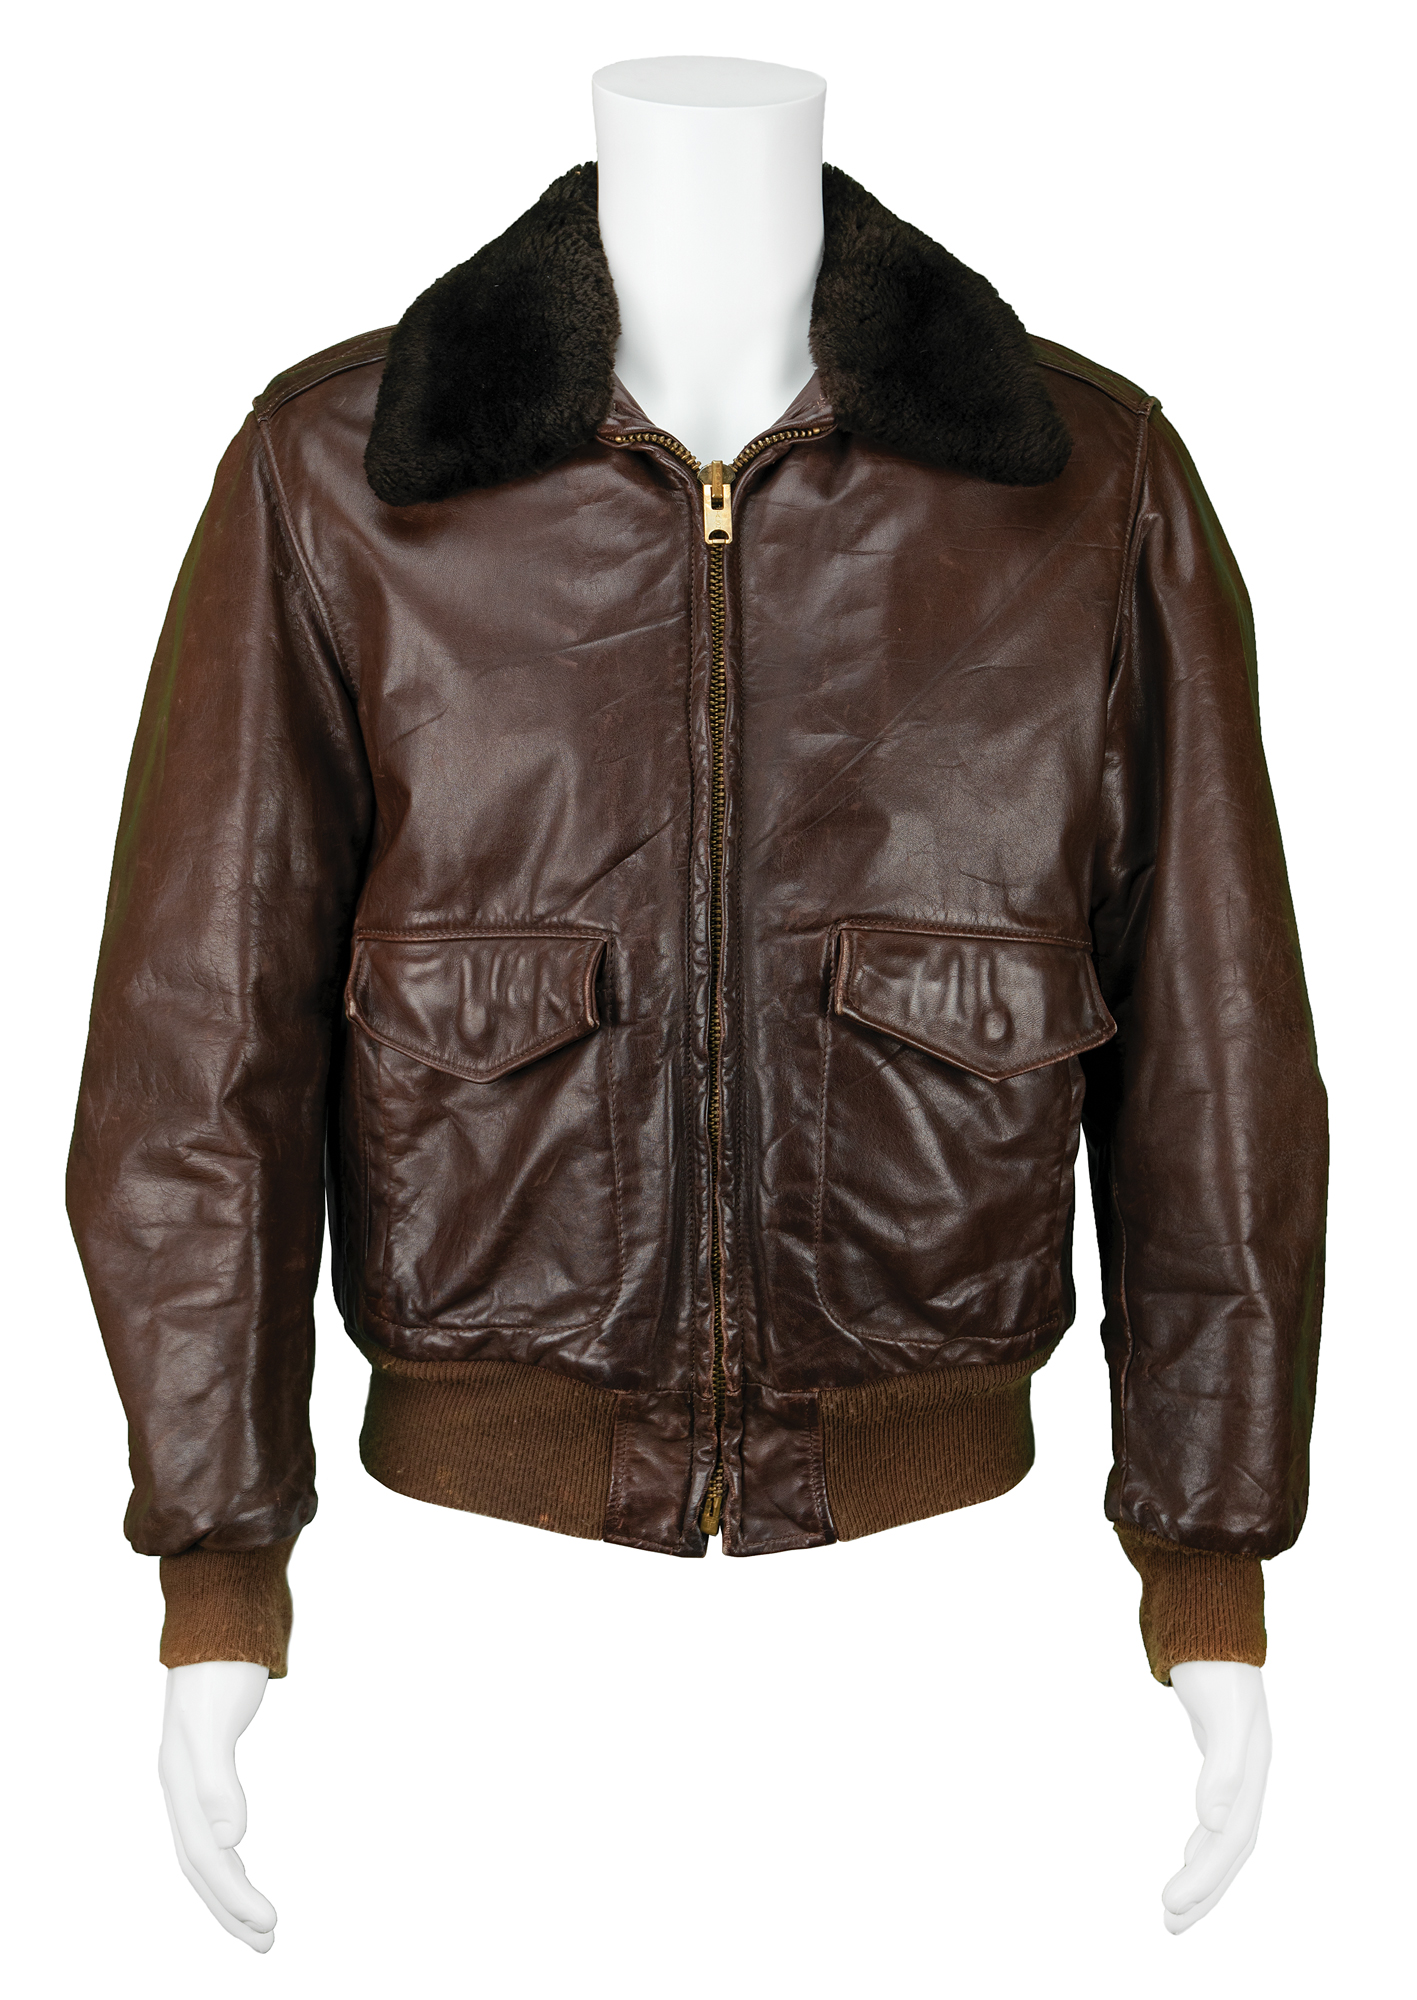 Lot #7008 Steve Jobs's Personally-Owned and -Worn Leather Bomber Jacket